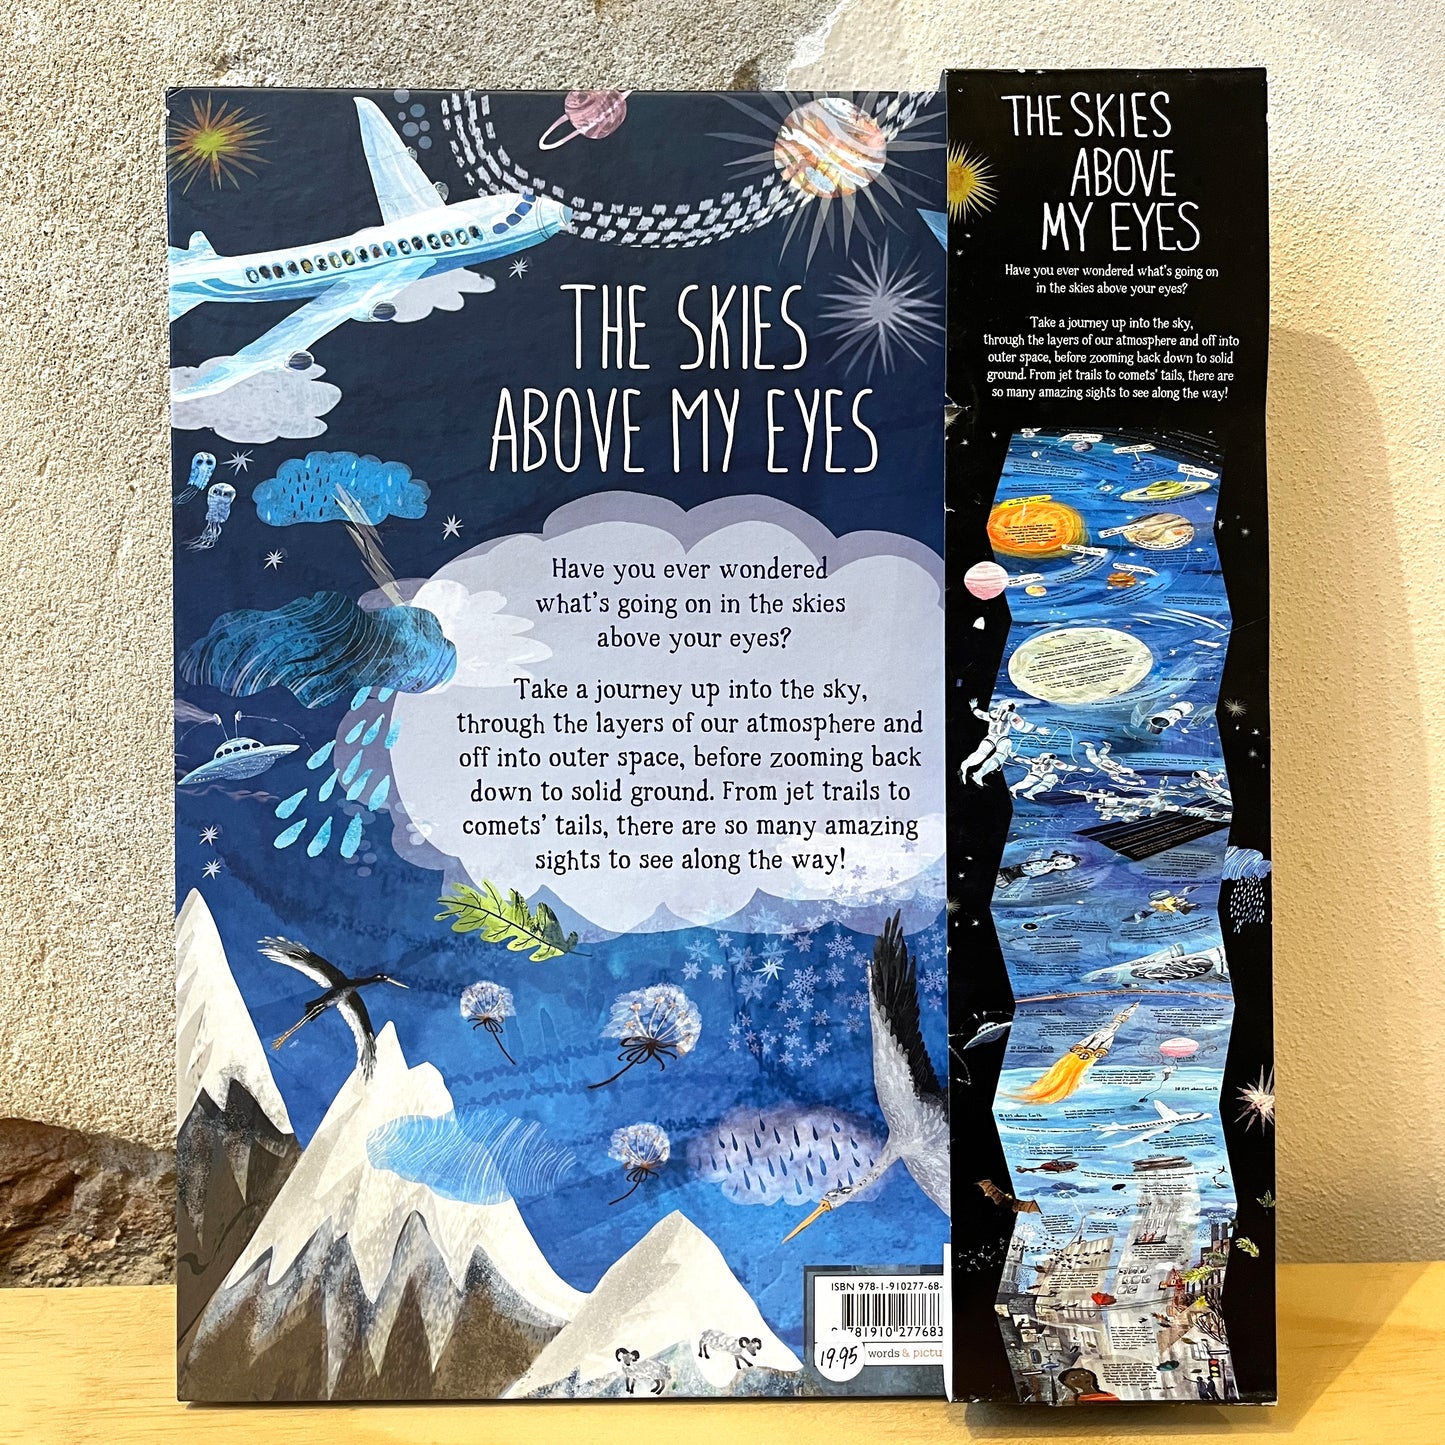 The Skies Above My Eyes – Charlotte Guillain, Yuval Zommer